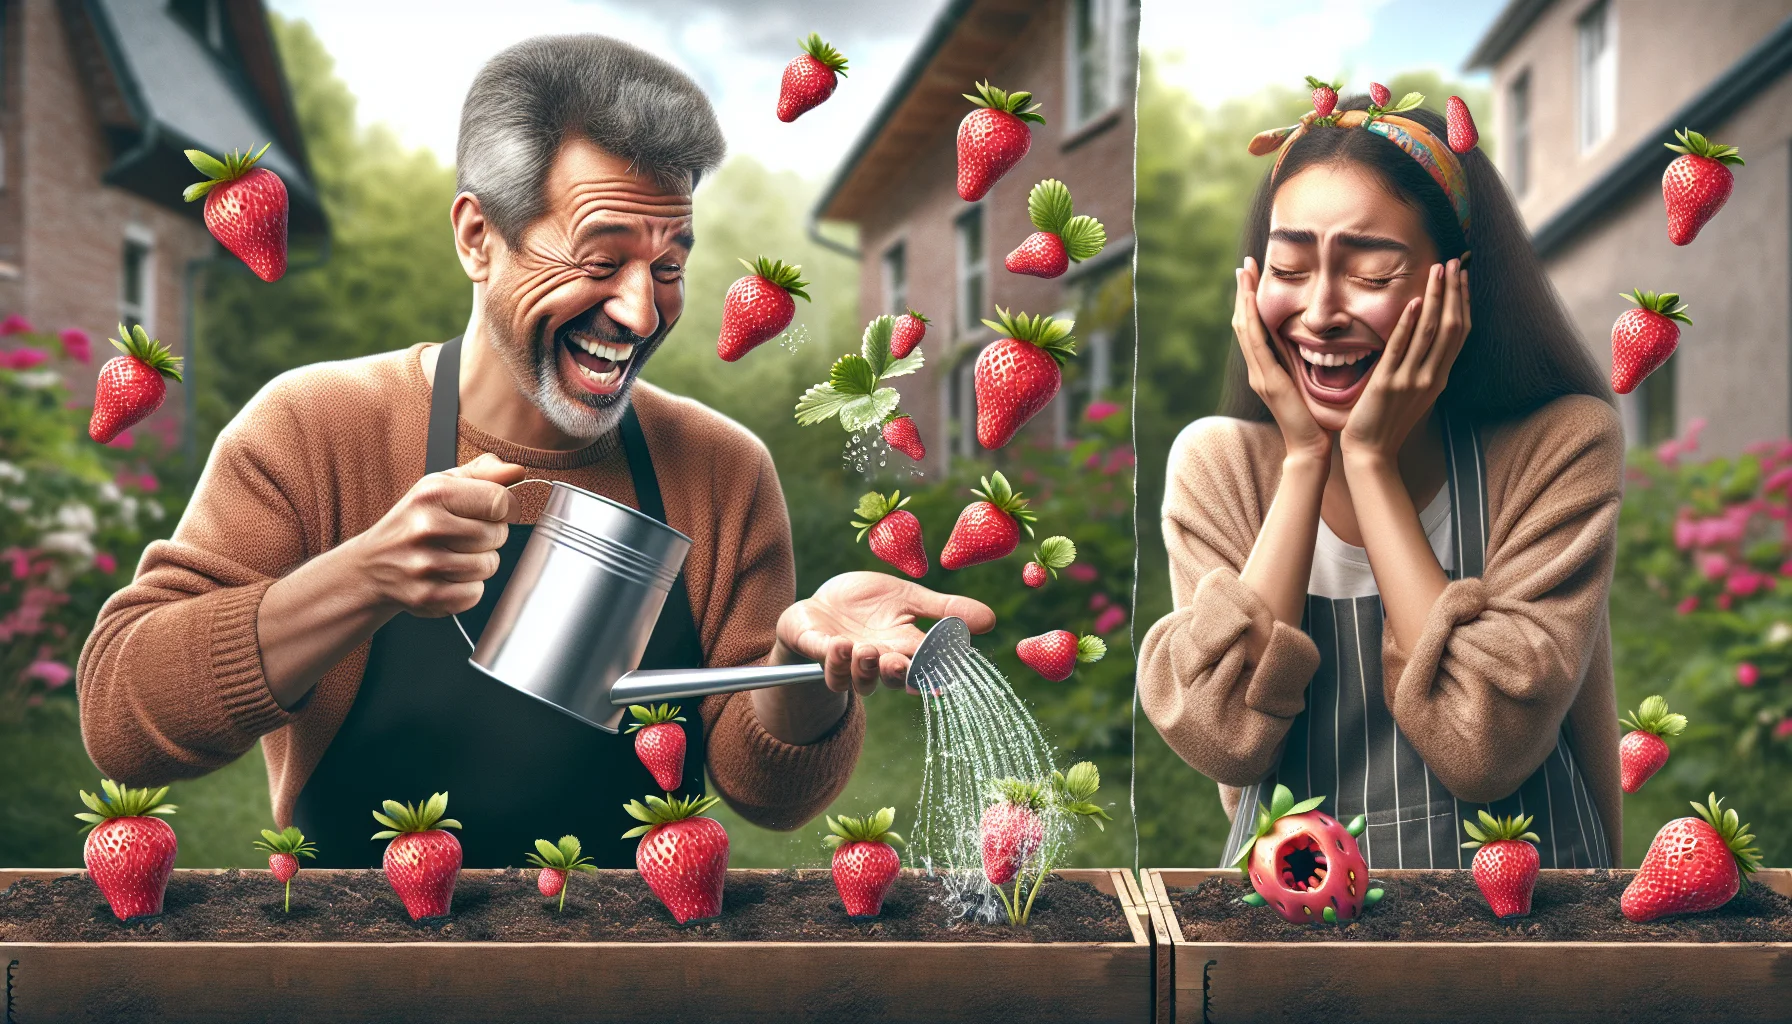 Craft a lively and humorous image of strawberry plants sprouting from seeds. Let's illustrate this in a backyard garden, where a middle-aged Hispanic man with a charming smile is showering the plants with a watering can. Suddenly, to his surprise, full-sized strawberries pop out instantly right after the water touches the seeds. In another corner, a young Caucasian woman, engaged in the scenario, laughing out loud and dropping her gardening tools in astonishment. Their expressions should emphasize the joy of gardening and the unexpected, almost magic-like growth of the strawberries.